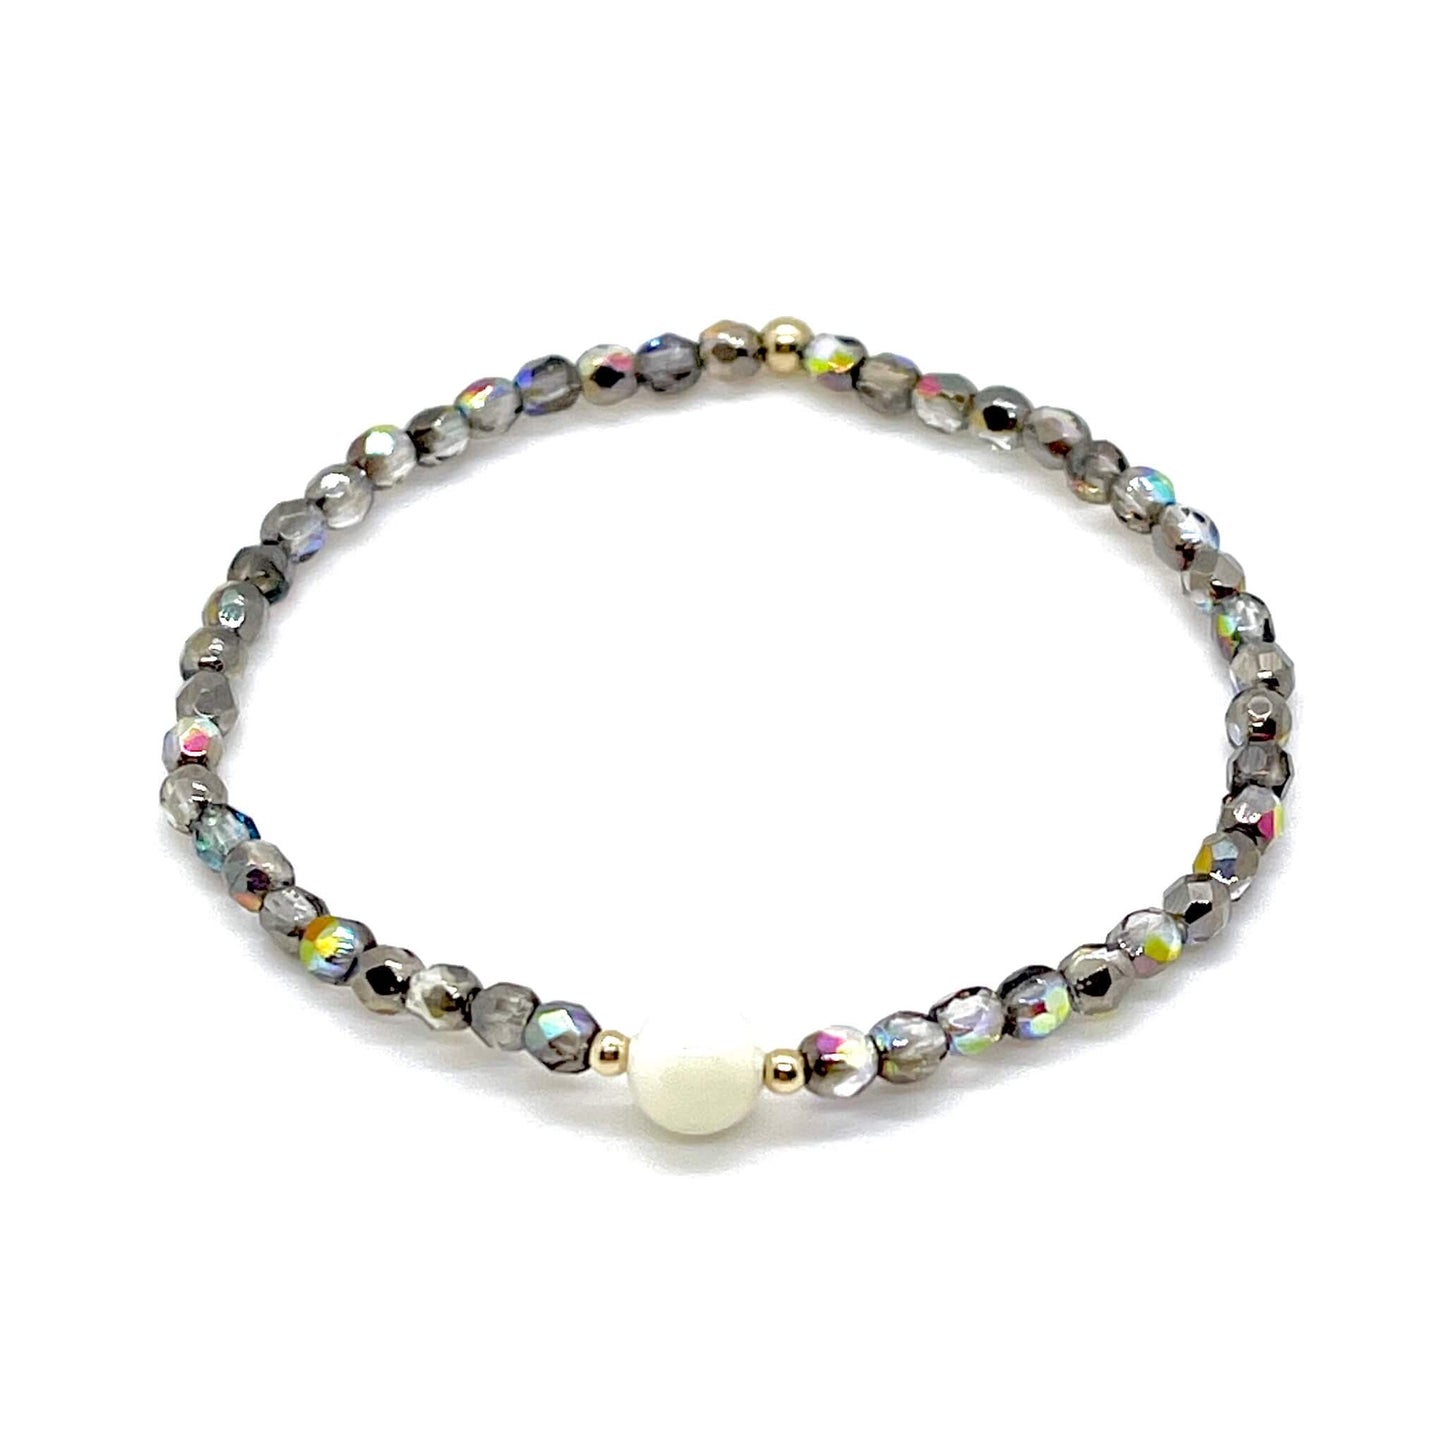 Grey-silver crystal bracelet with mother-of-pearl center bead and small gold accent beads.